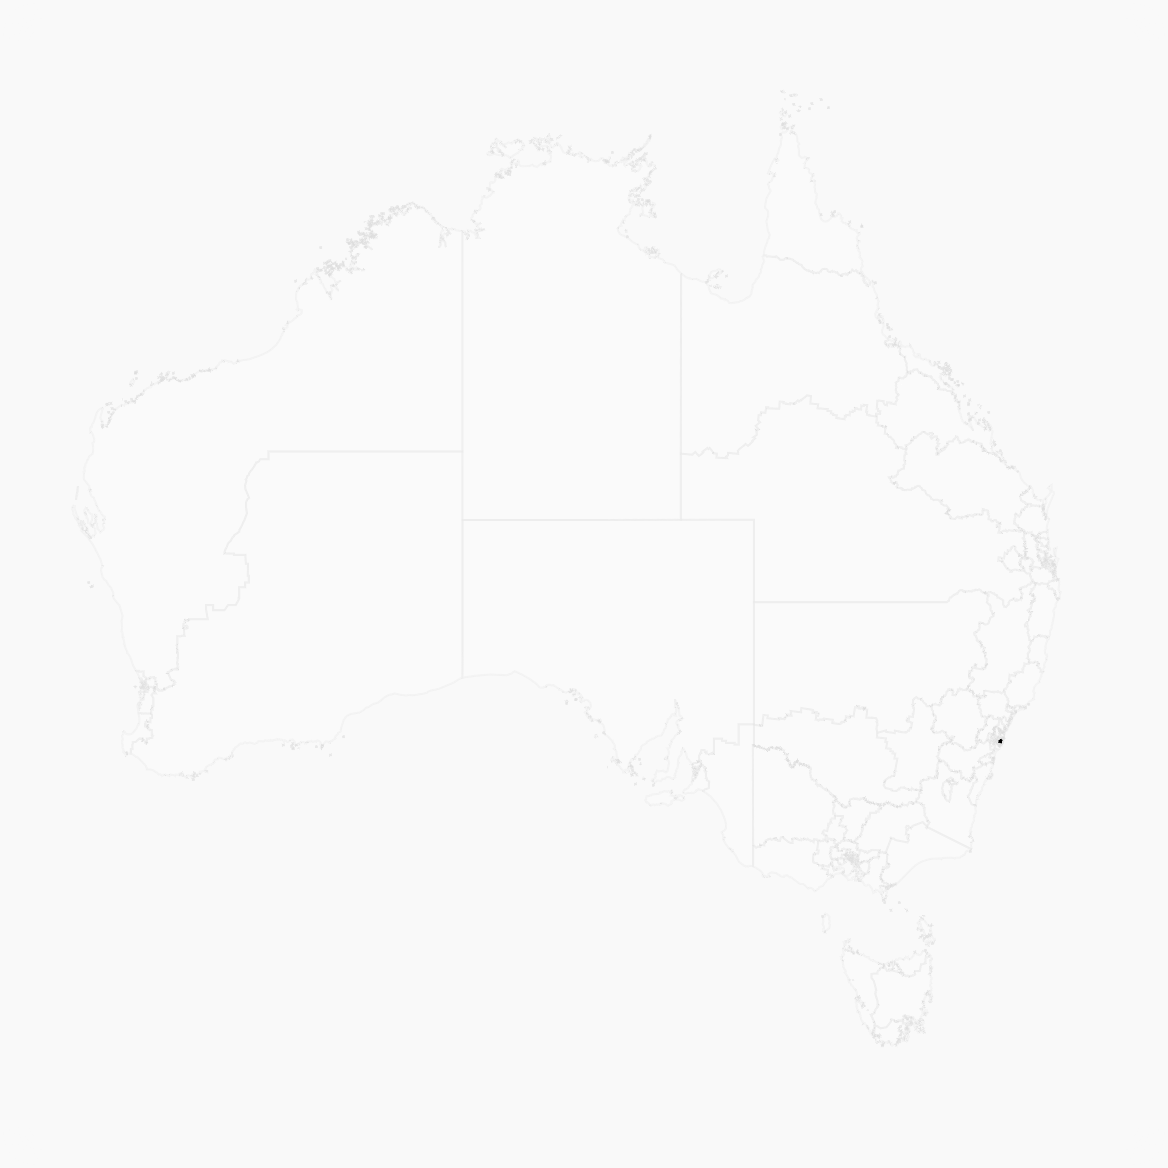 The map faded out, with just a tiny dot in Sydney representing the seat of Grayndler.